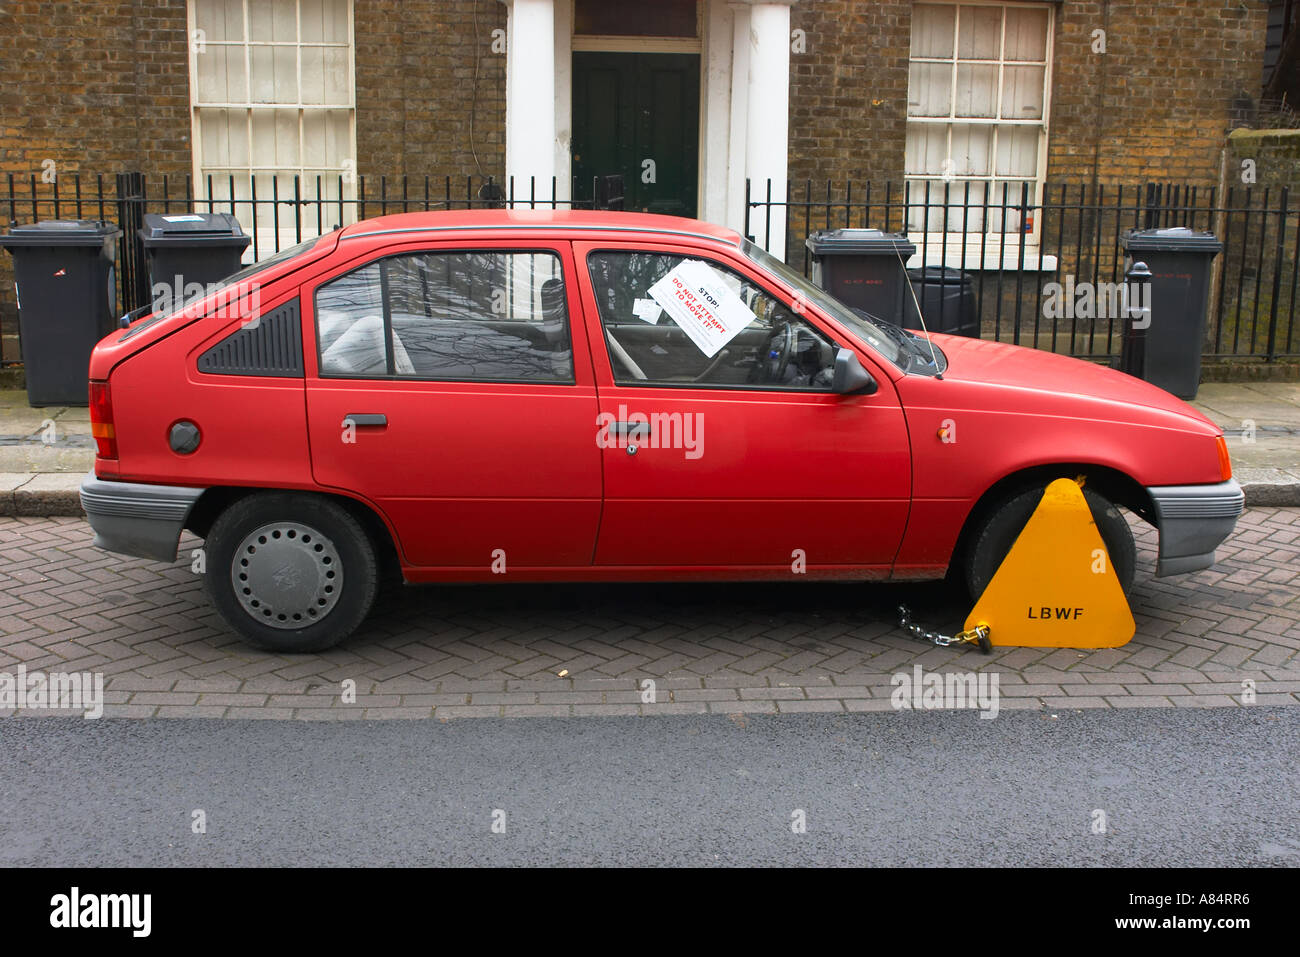 Red Vauxhall Astra clamped in a Walthamstow residential street Stock Photo